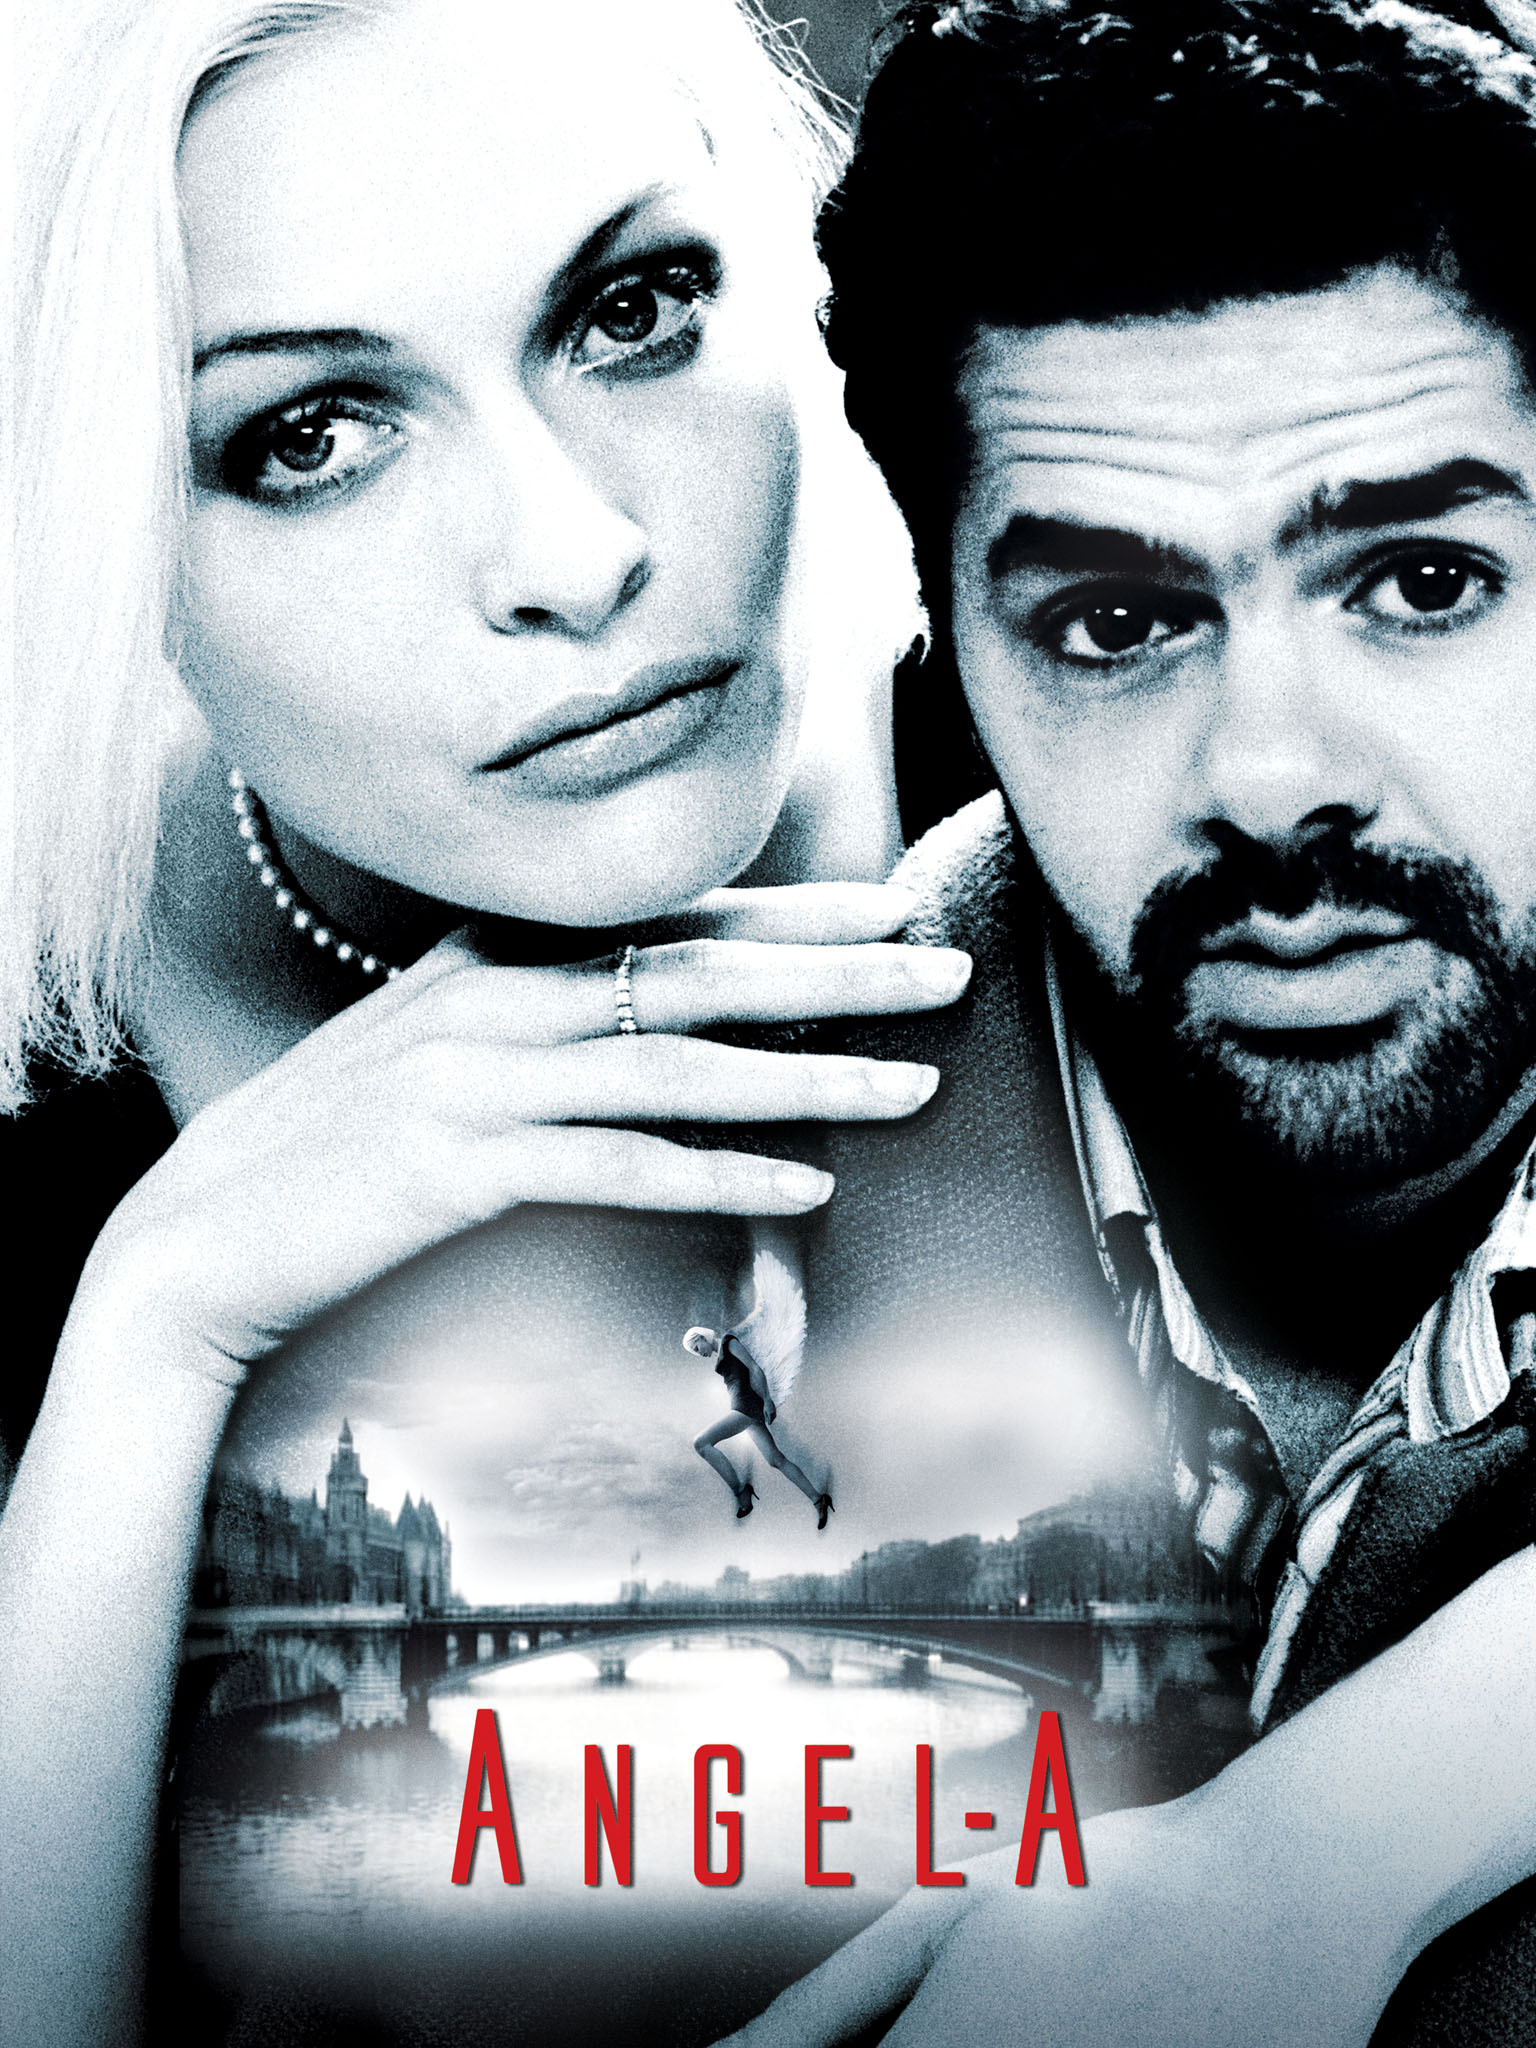 Angel-A movie, Where to watch, Stream online, TV guide, 1540x2050 HD Phone